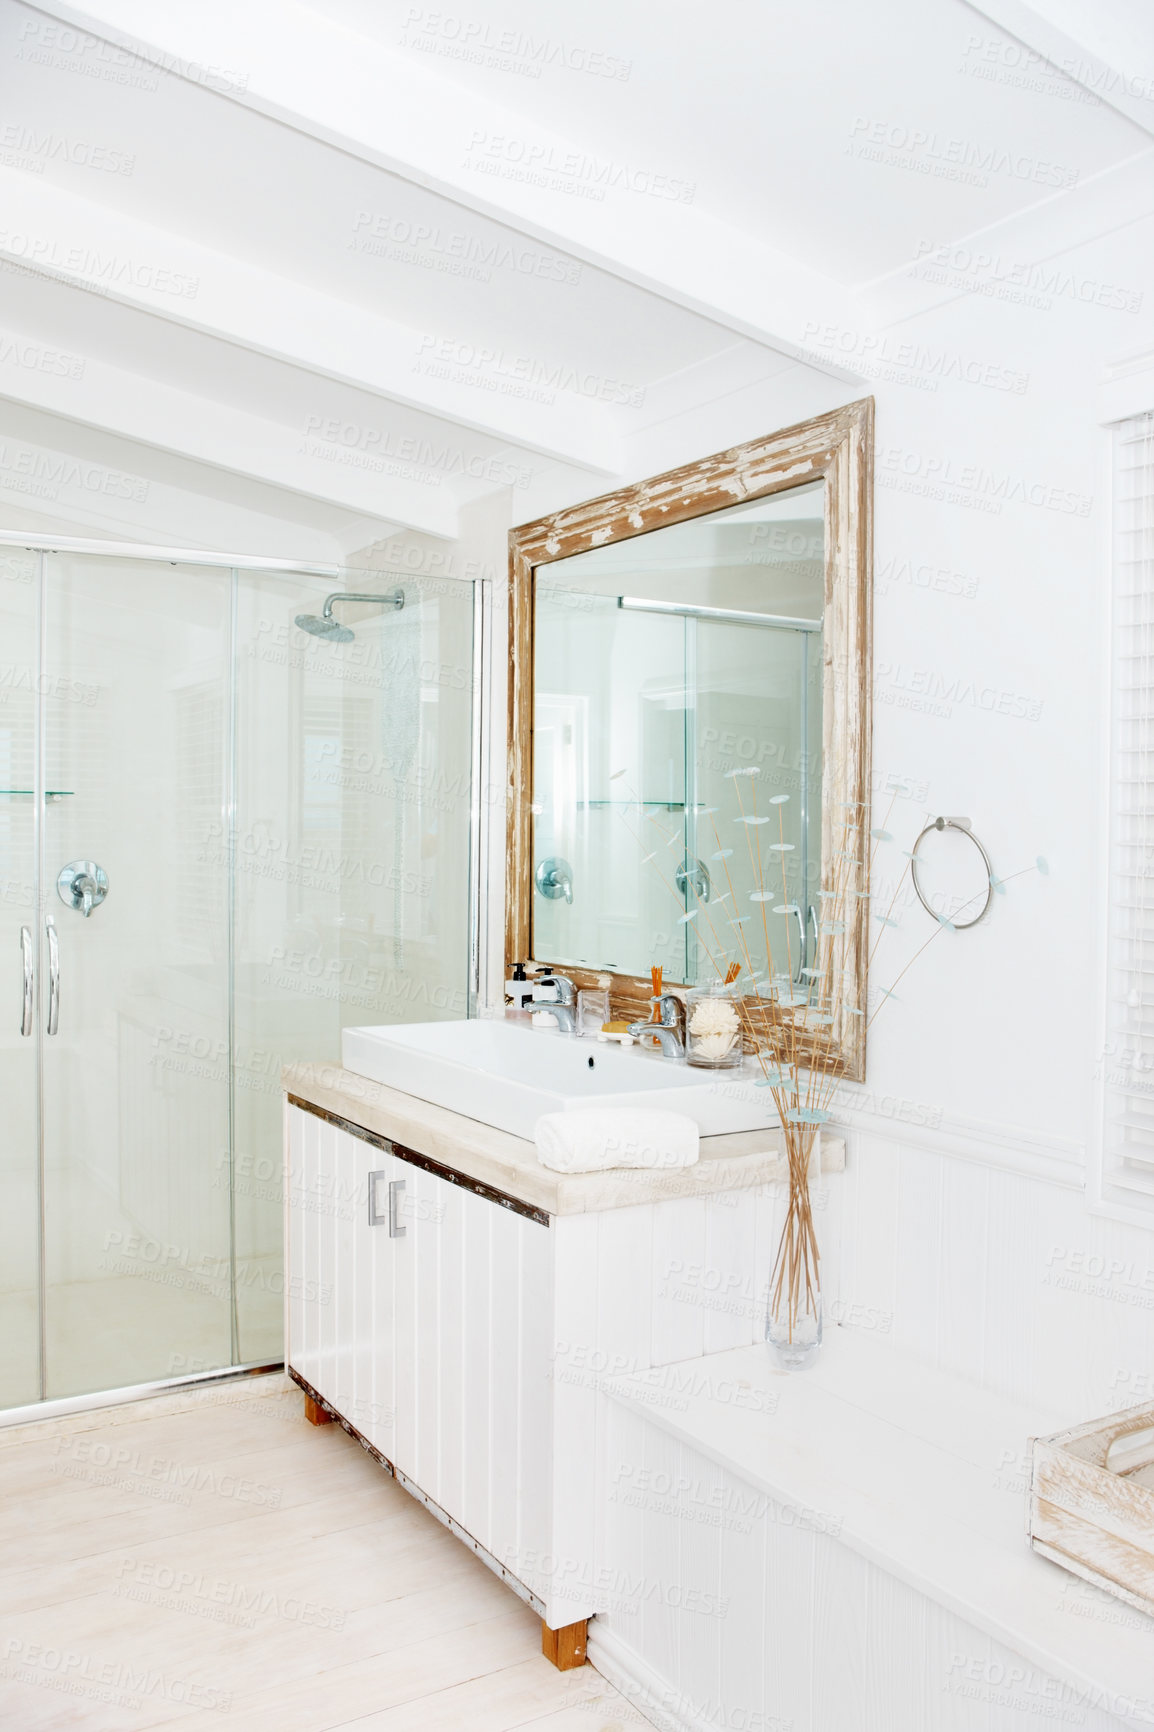 Buy stock photo Luxury, mirror and shower in the bathroom interior of a modern home or apartment for lifestyle. Hotel, real estate or wealth with marble, ceramic tiles and a vanity against a wall for design